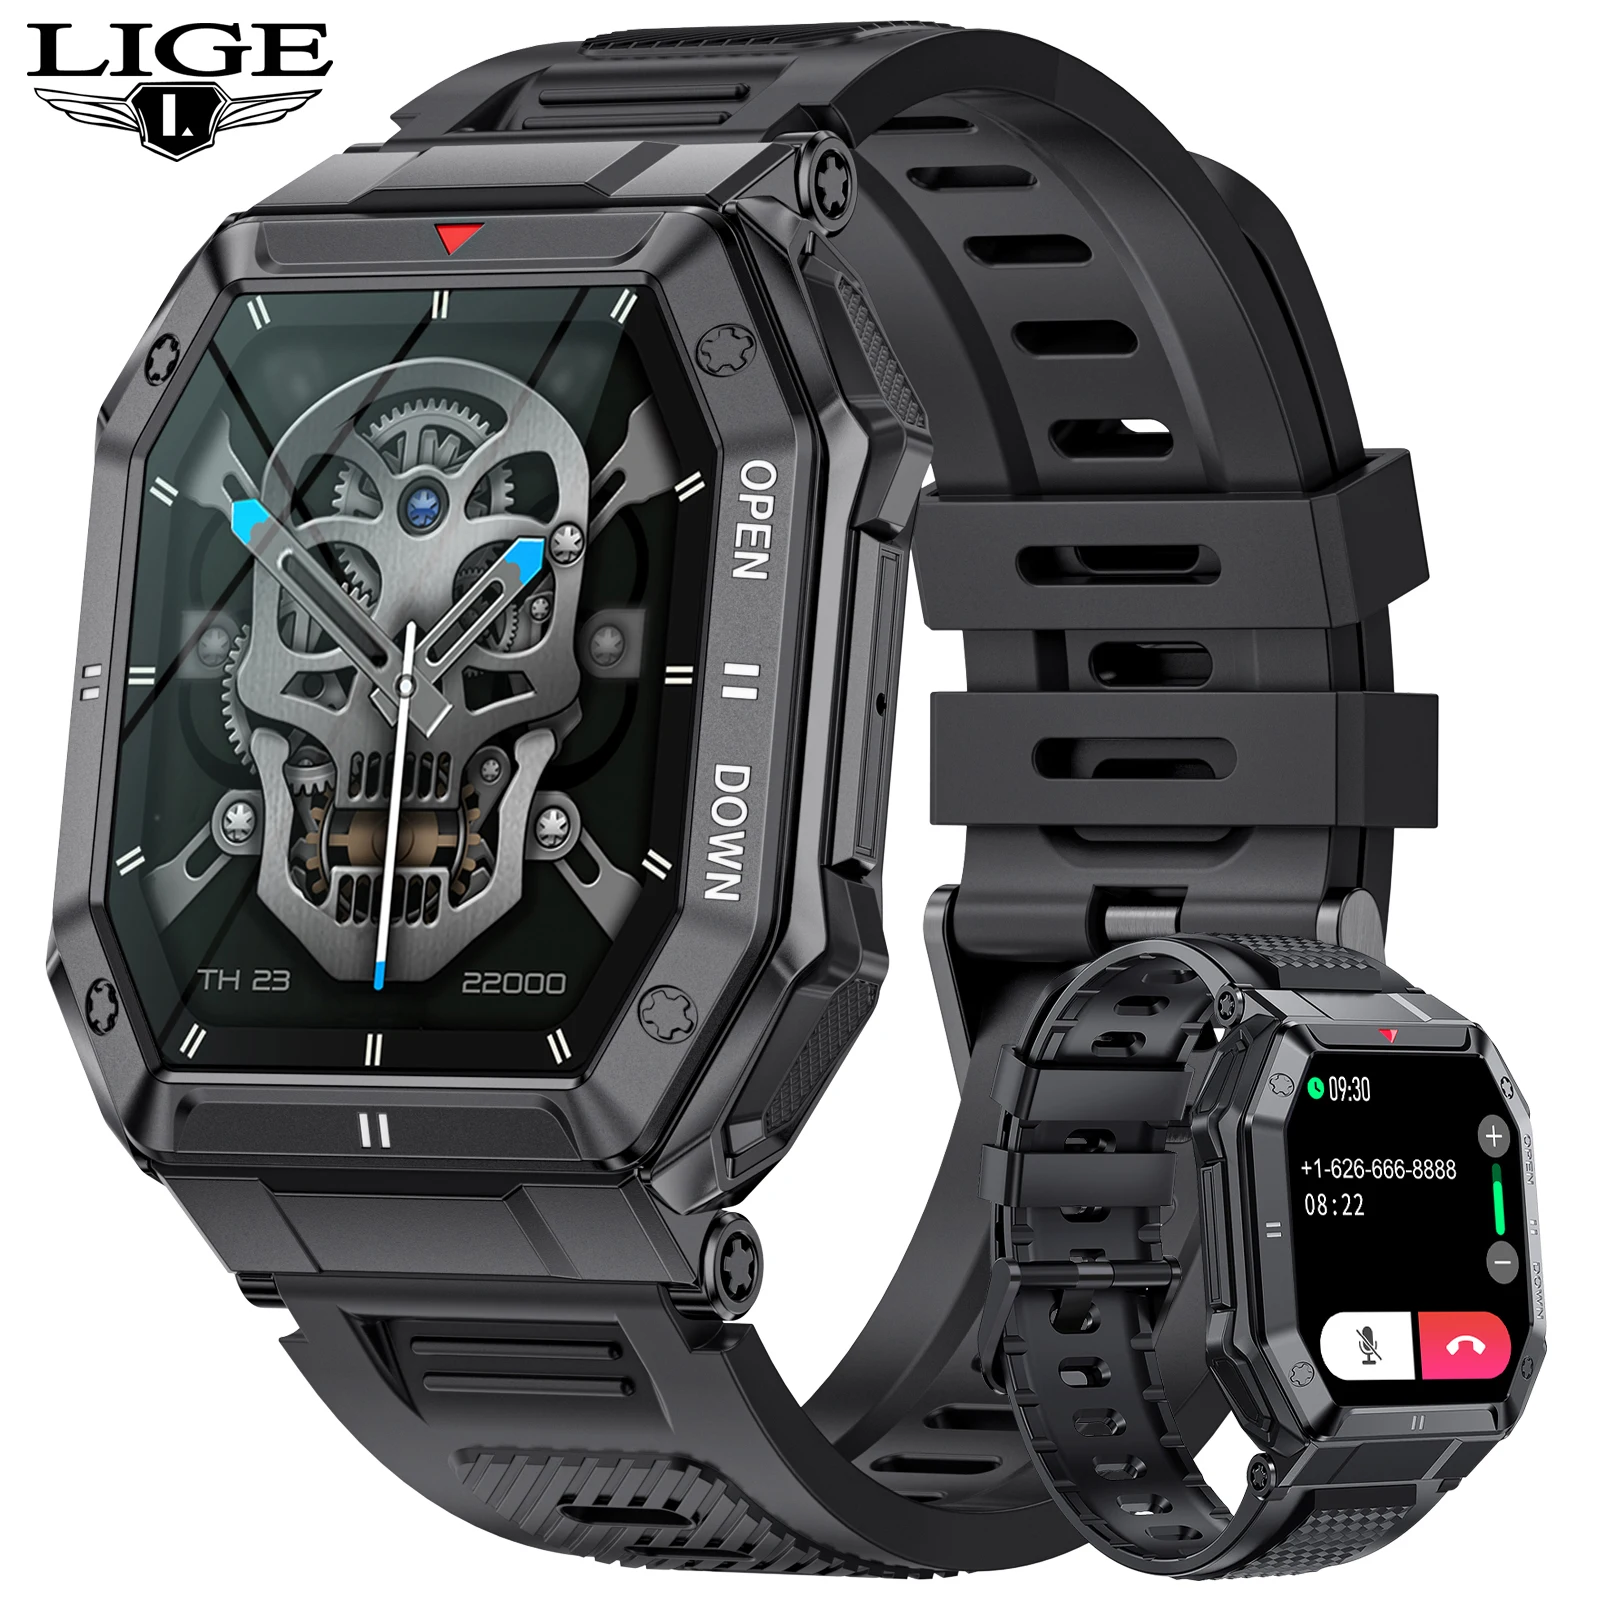 

LIGE New Military Smart Watches for Men,5ATM Waterproof Outdoors Sport Fitness Activity Tracker Watch, 1.85'' HD Blood Pressure